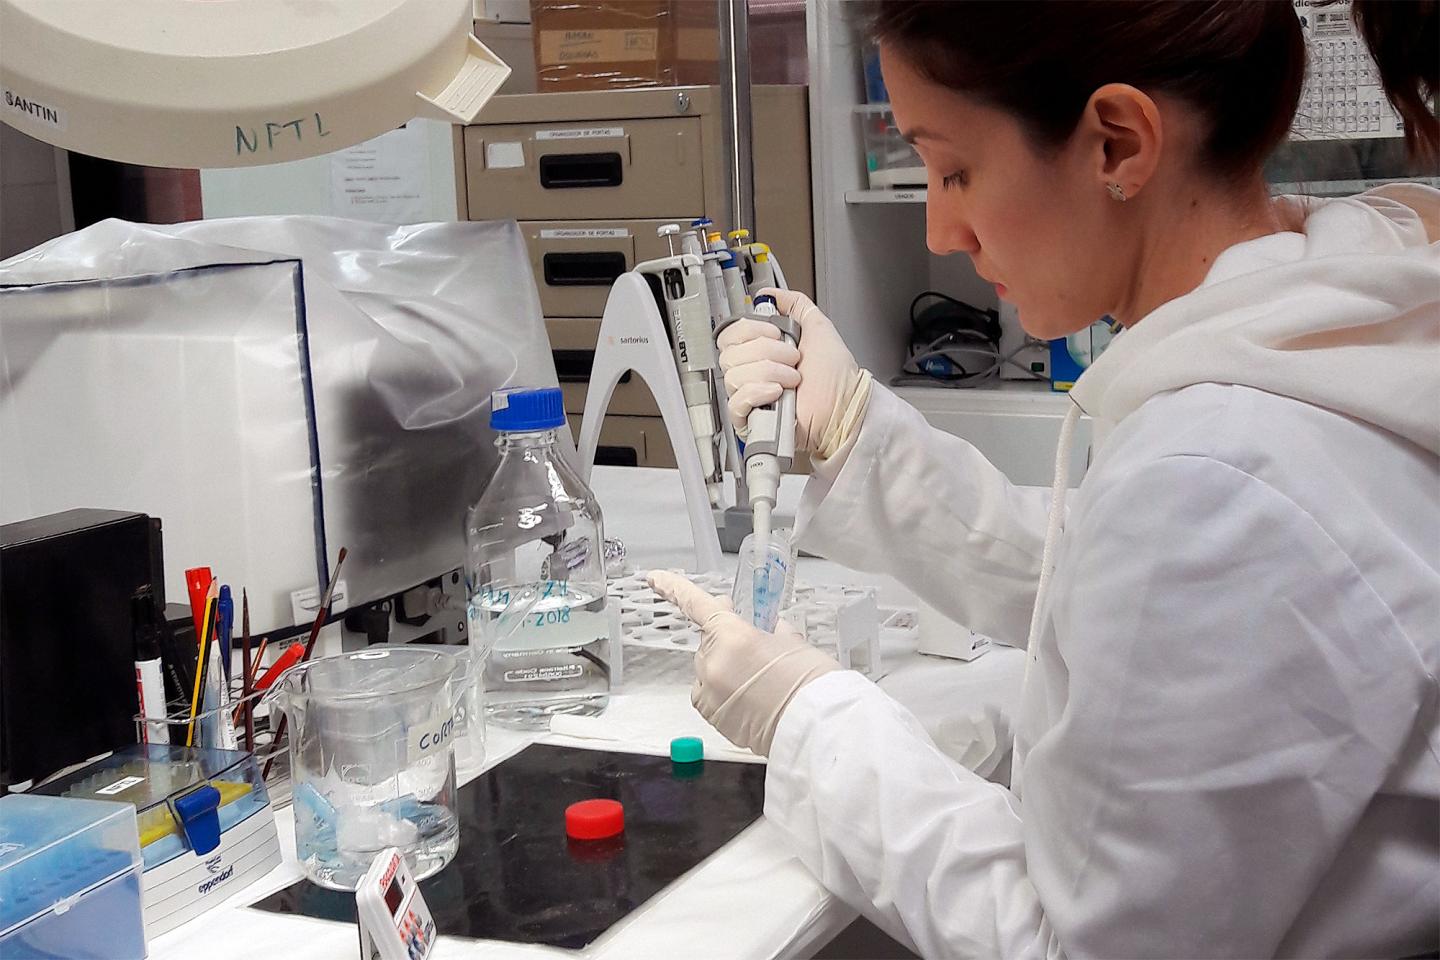 Researcher Patricia Sampedro in One of the Laboratories Where the Study Was Performed